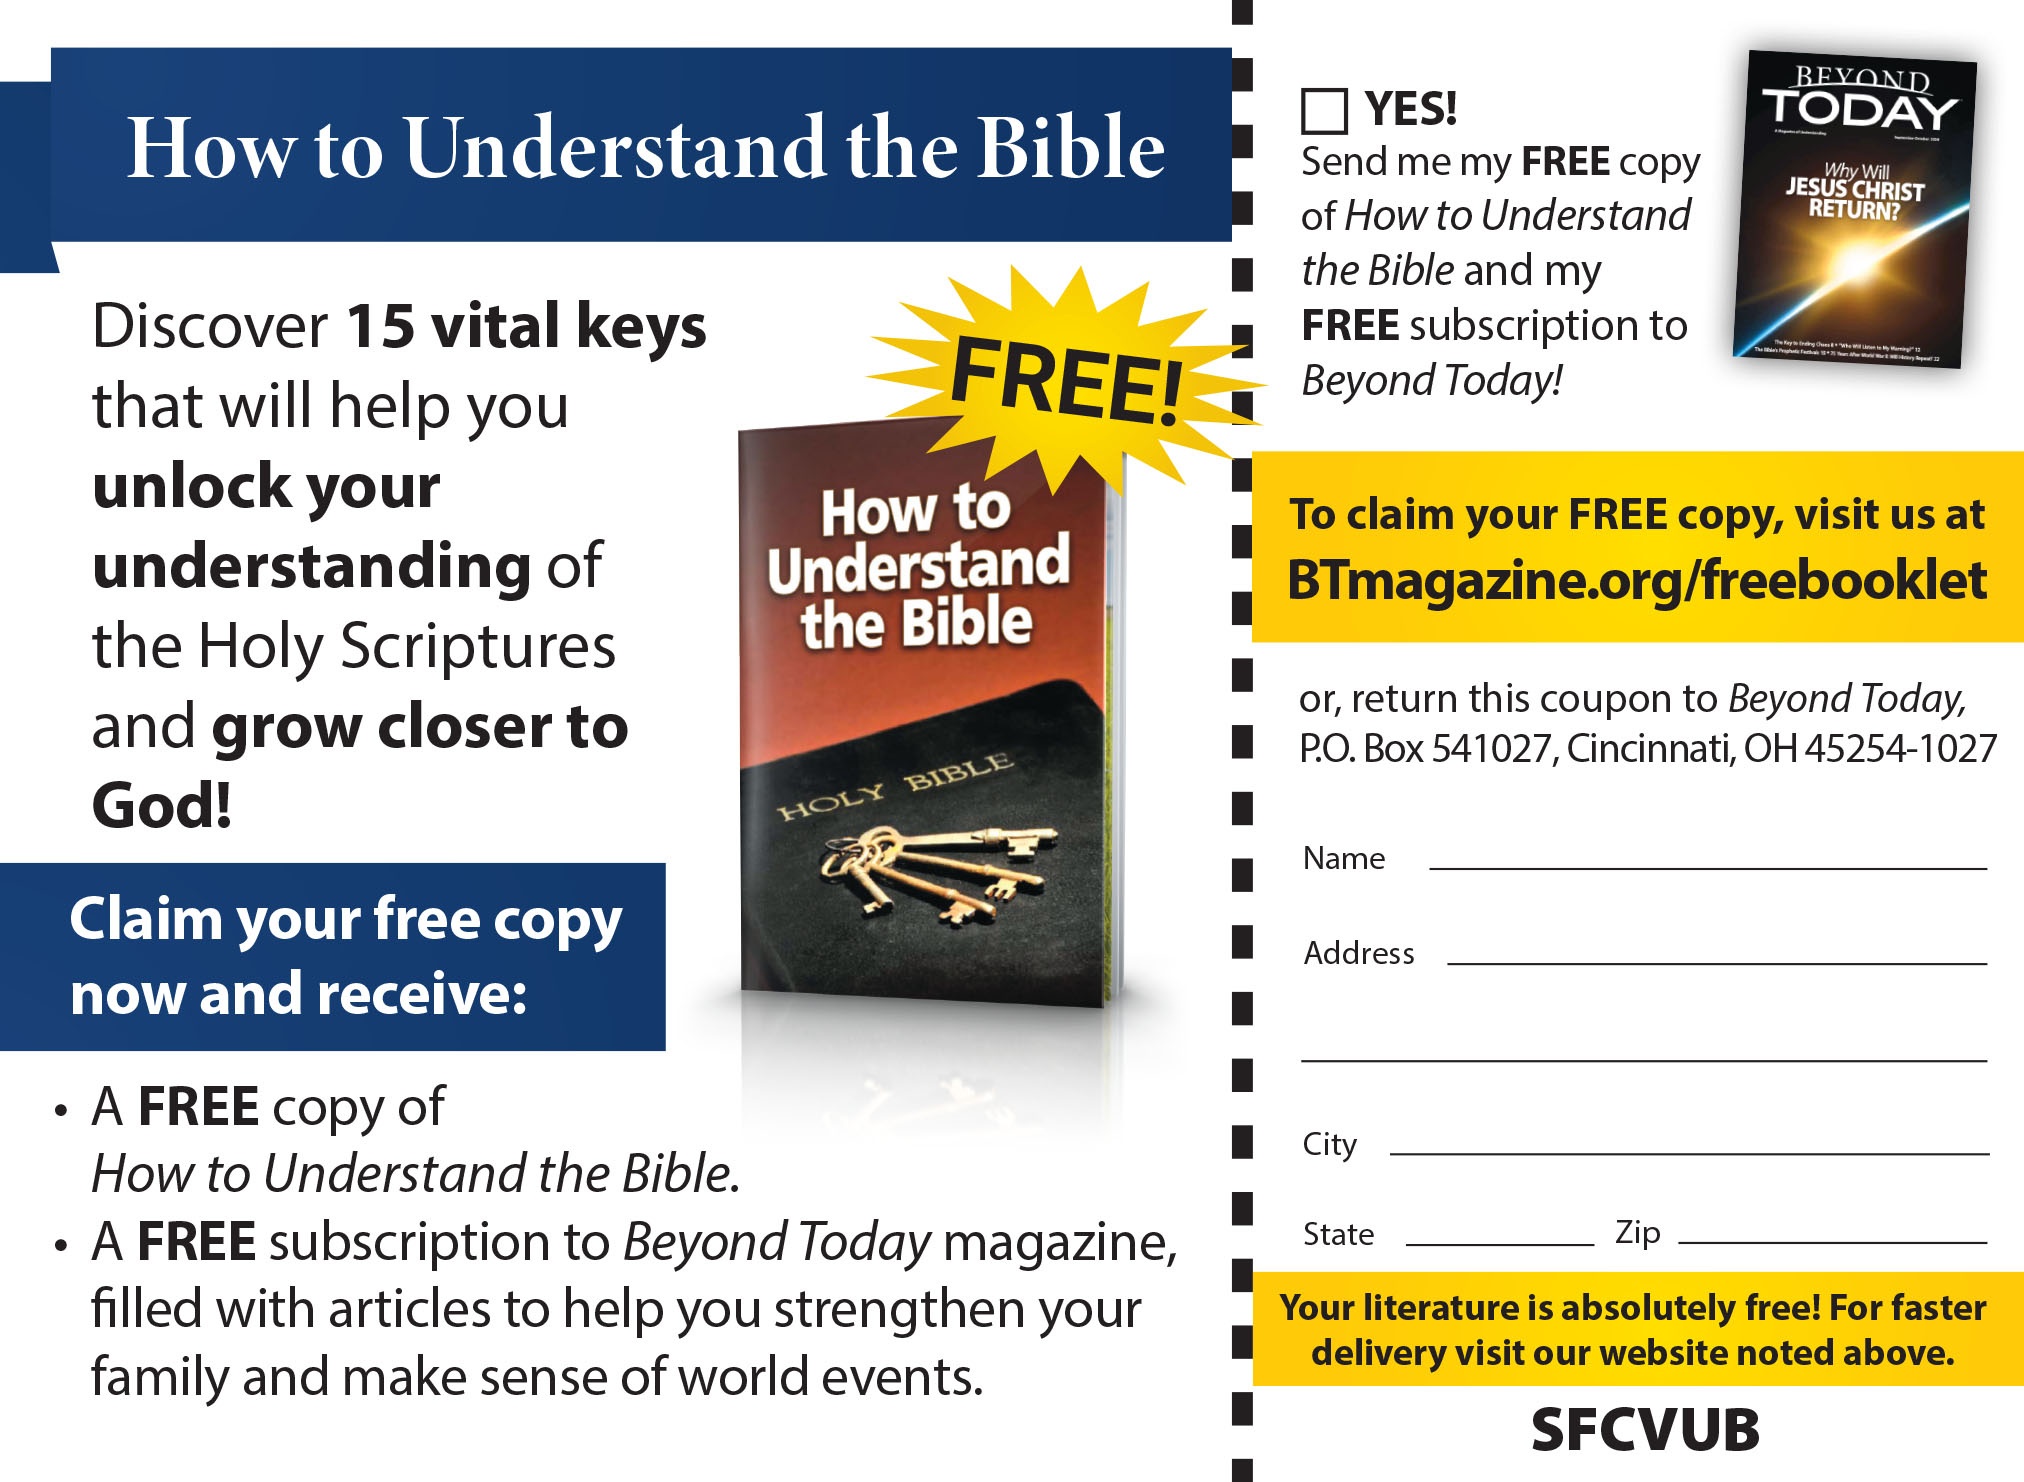 the bible experience coupon